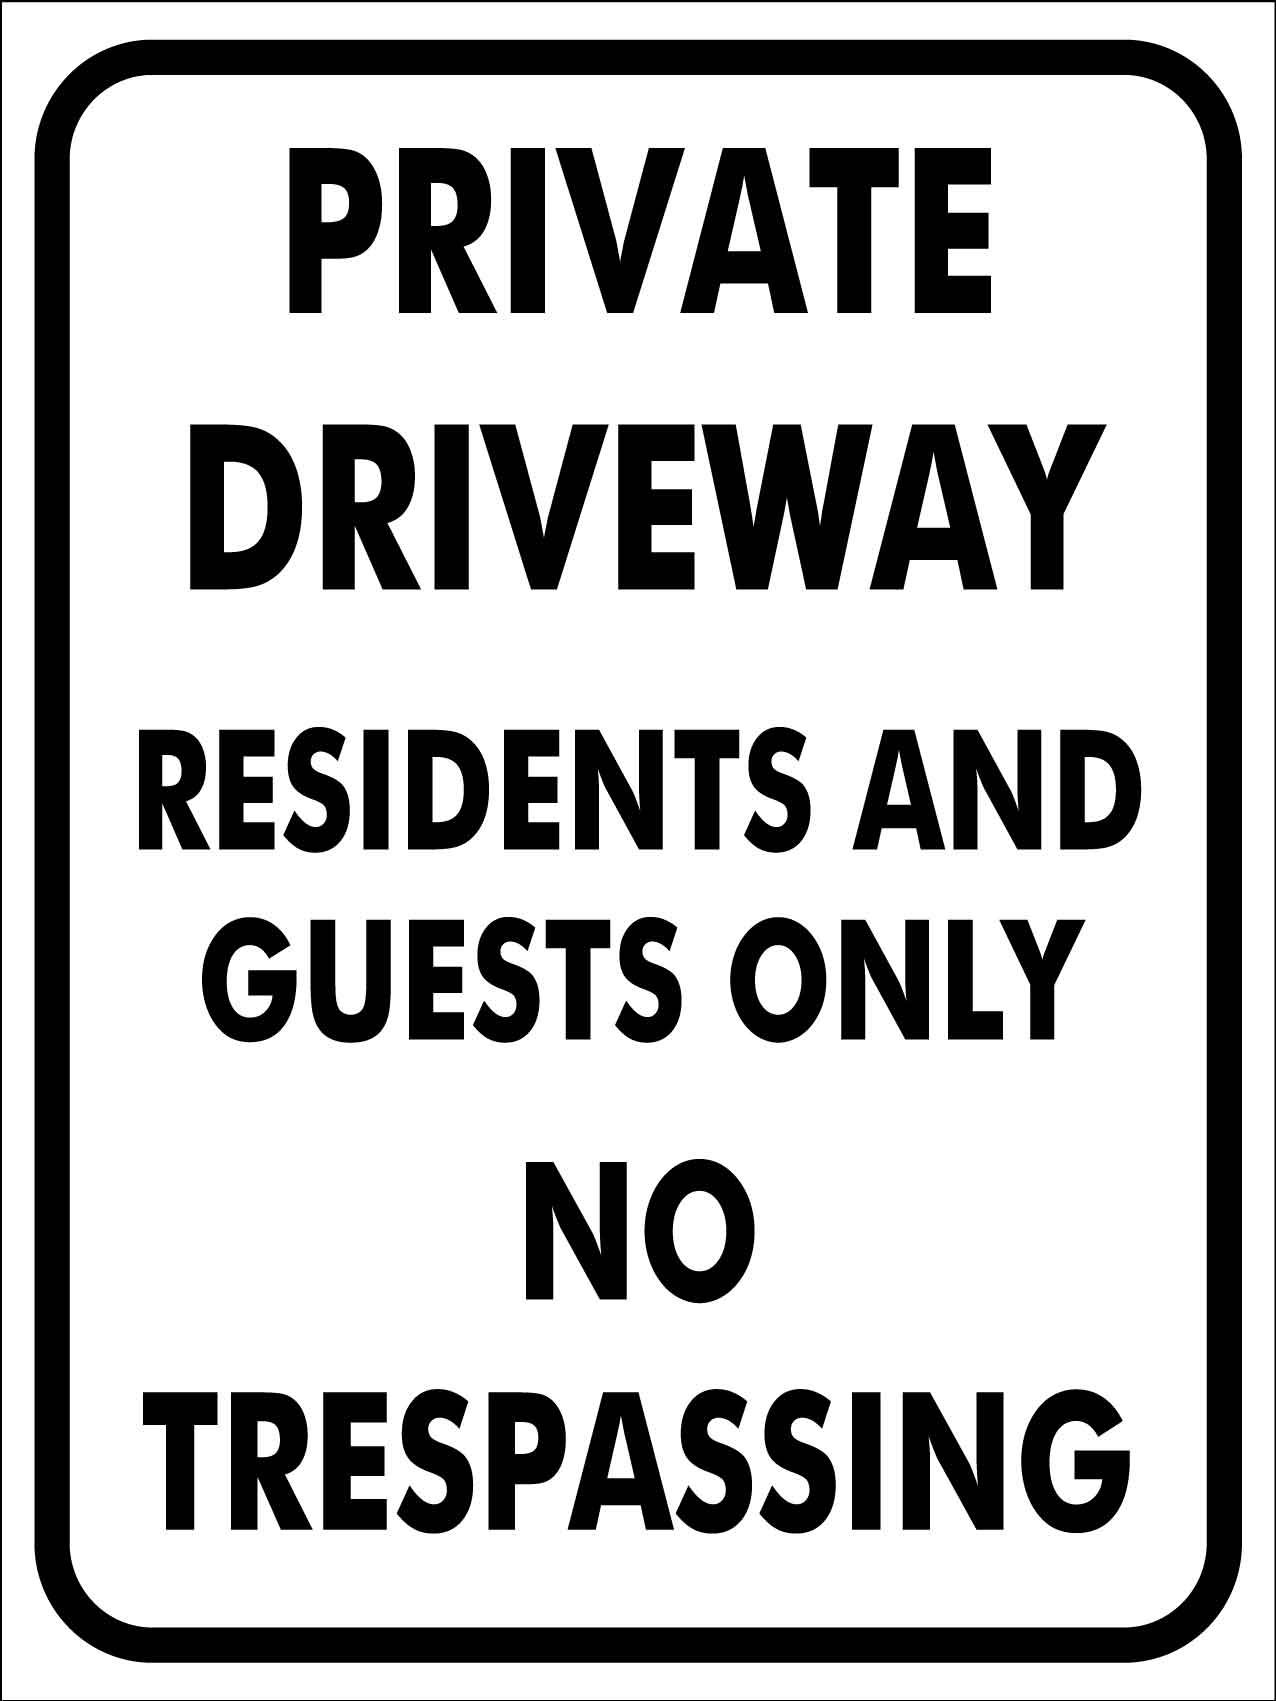 Private Driveway Residents And Guests Only No Trespassing Sign